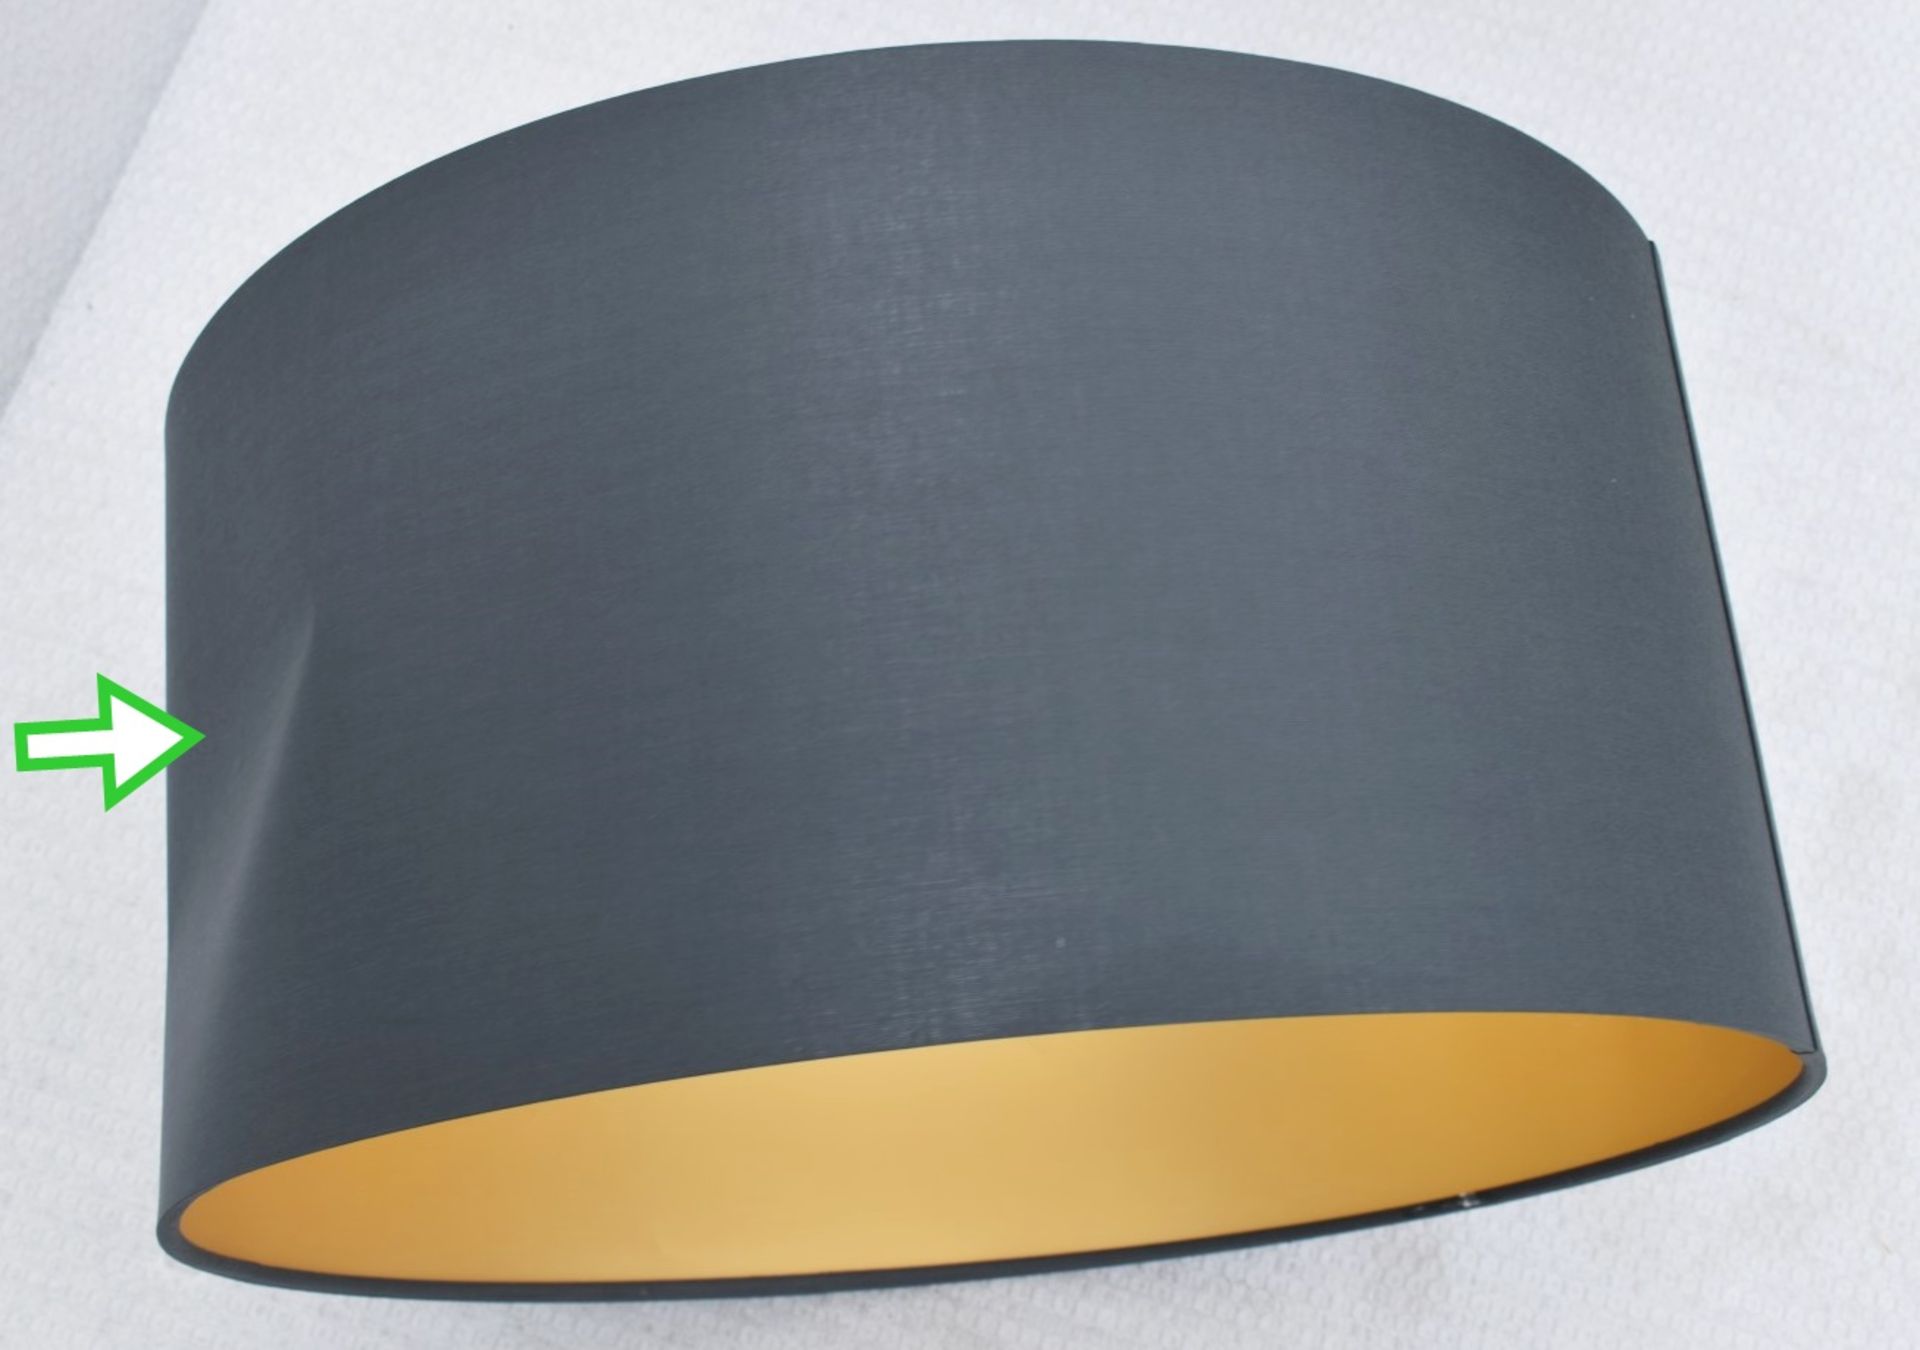 1 x PORADA 'Gary' Designer Floor Lamp Cotton Drum Shade In Charcoal and Gold - Unused Boxed - Image 5 of 5